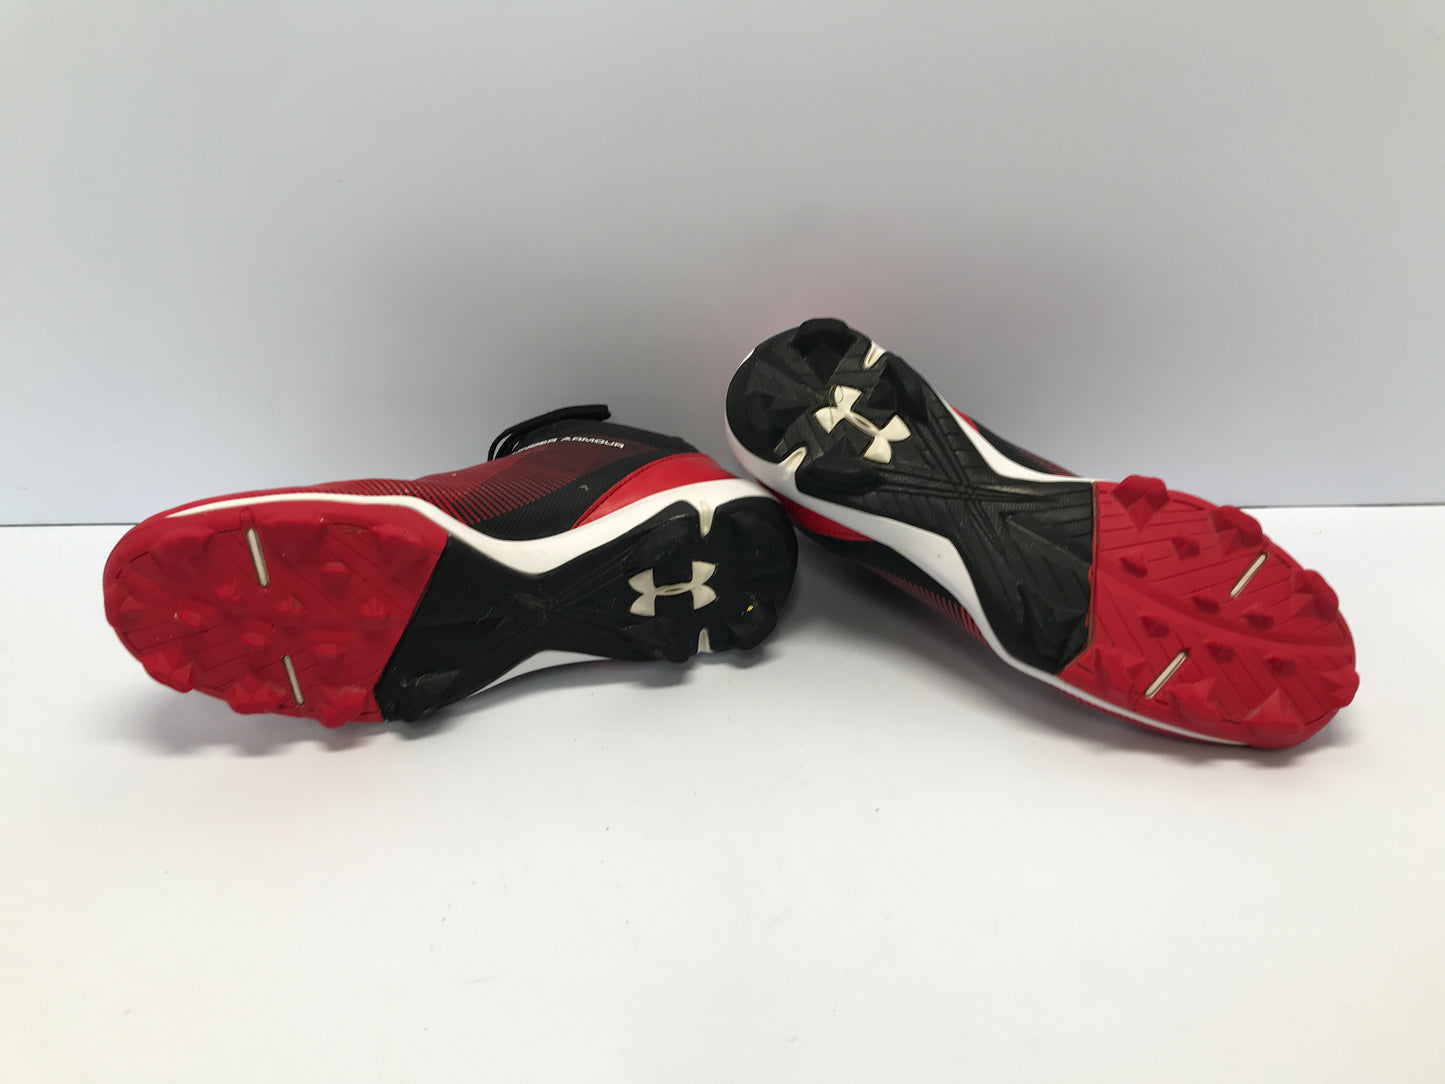 Baseball Shoes Cleats Men's Size 7.5 Under Armour Black White Red High Top  Excellent